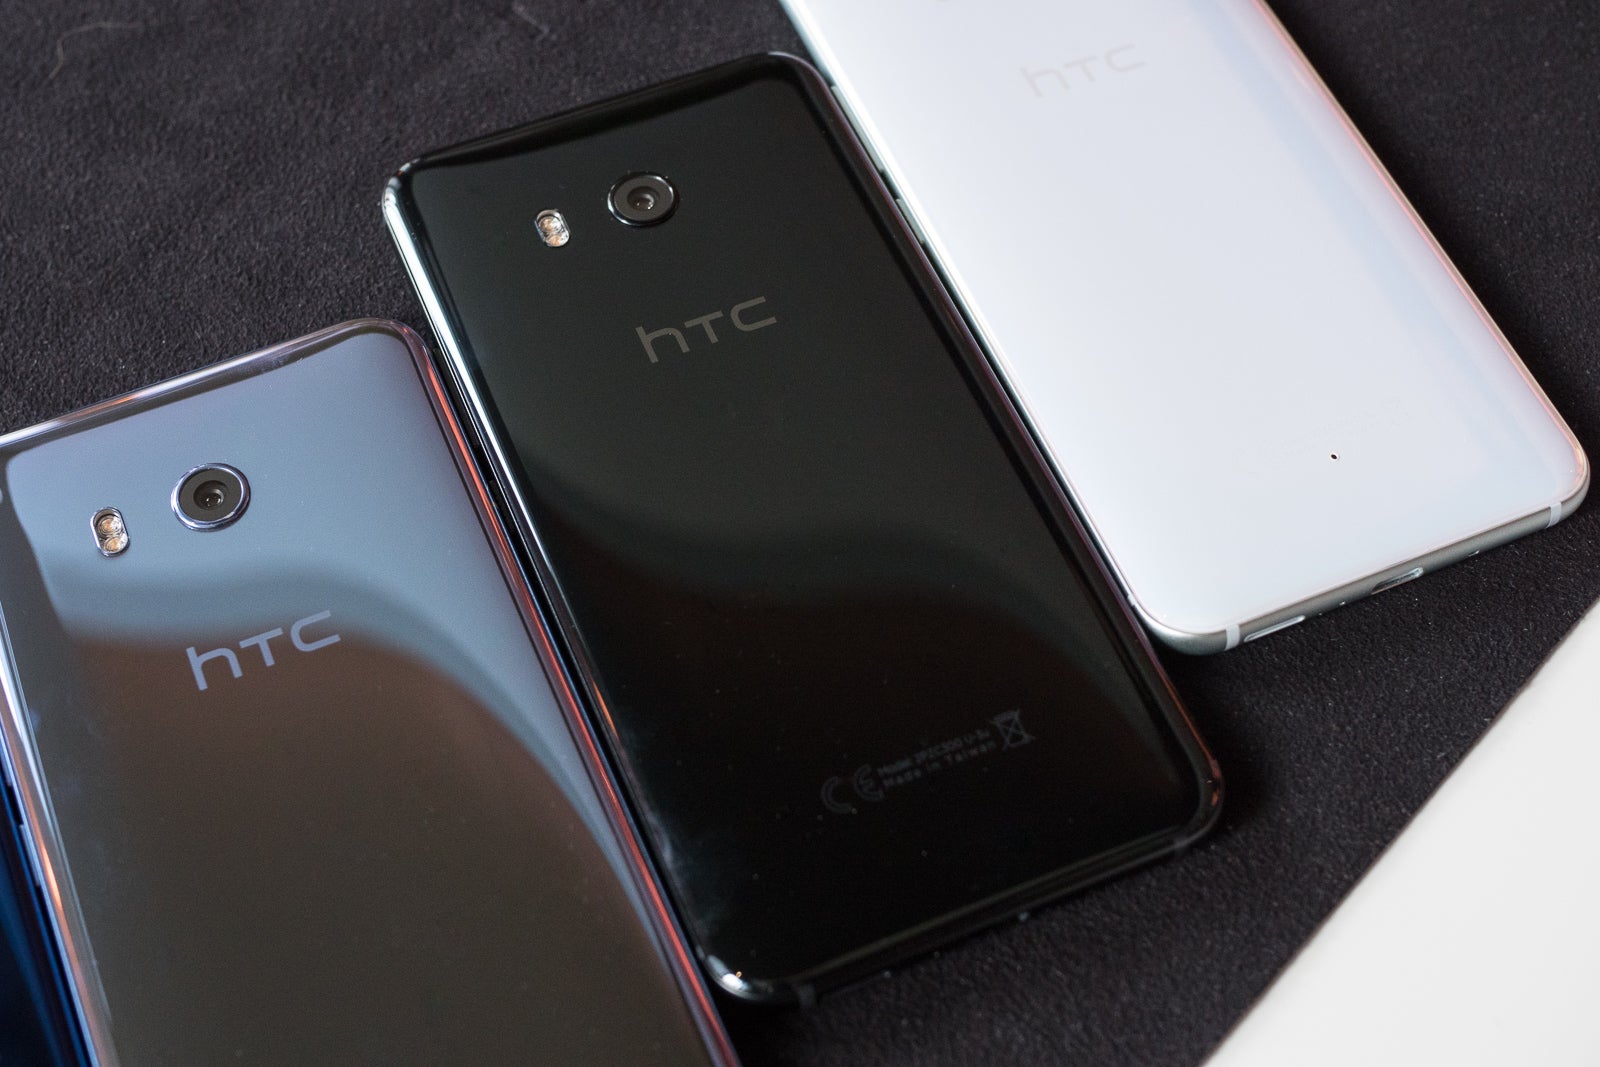 The HTC U11 is the company's new flagship, and you can squeeze it!